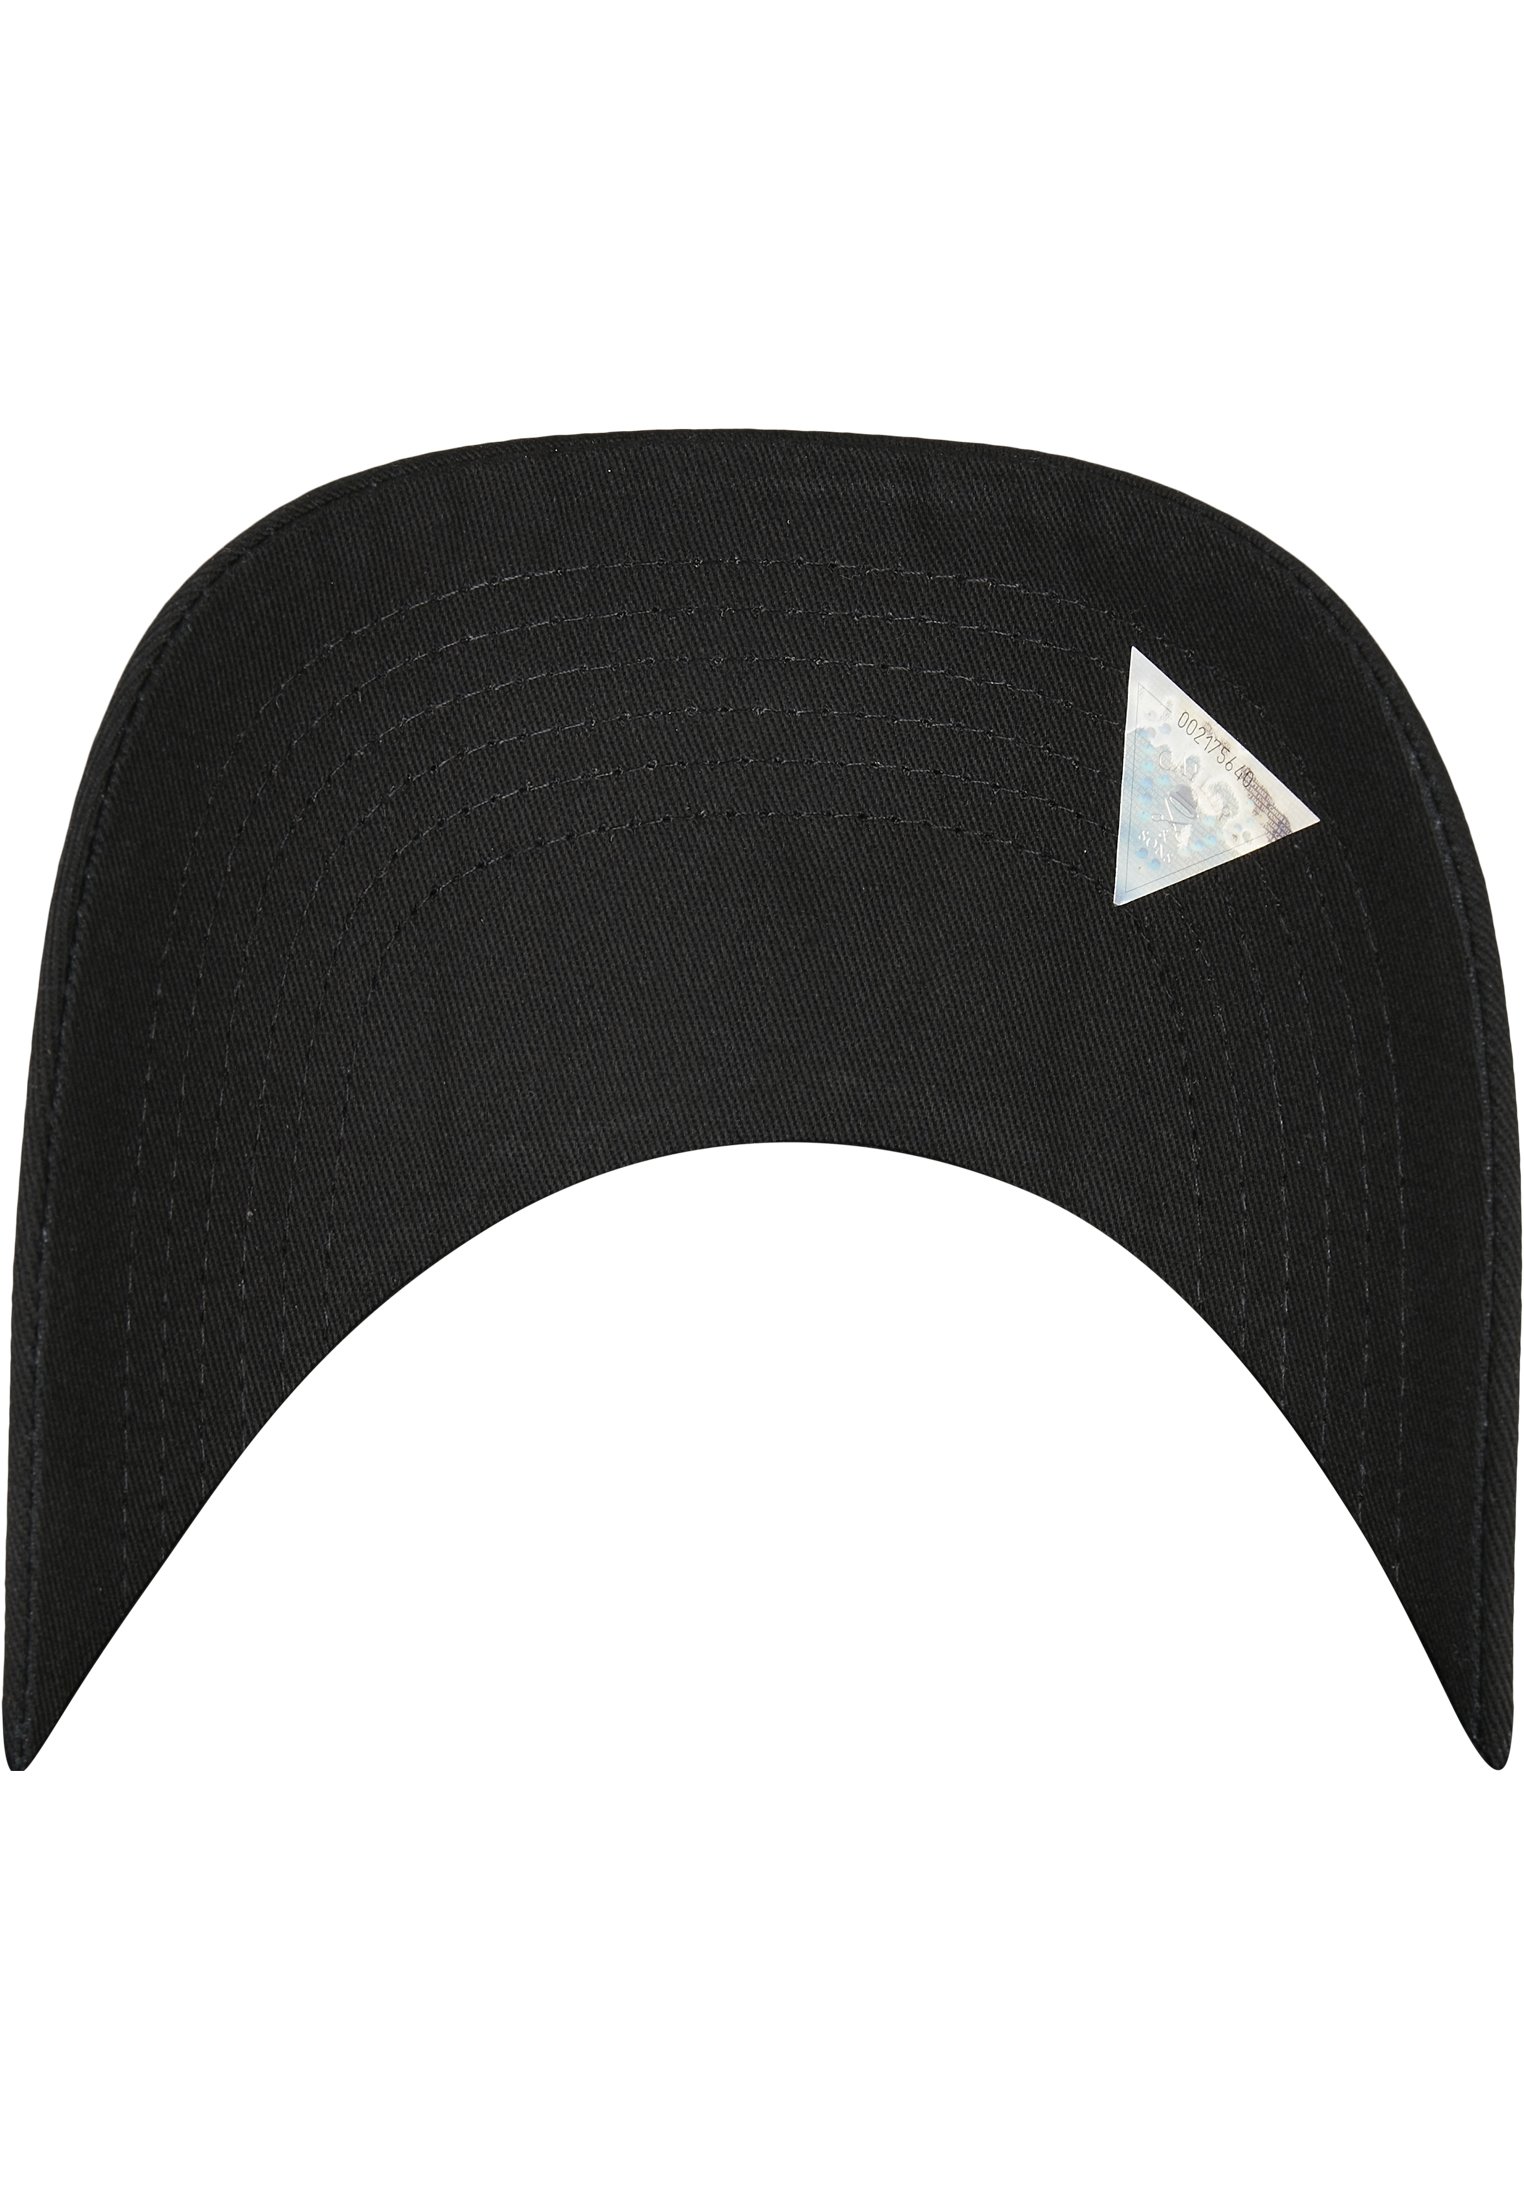 C&S WL Pay Me Curved Cap black/mc one size